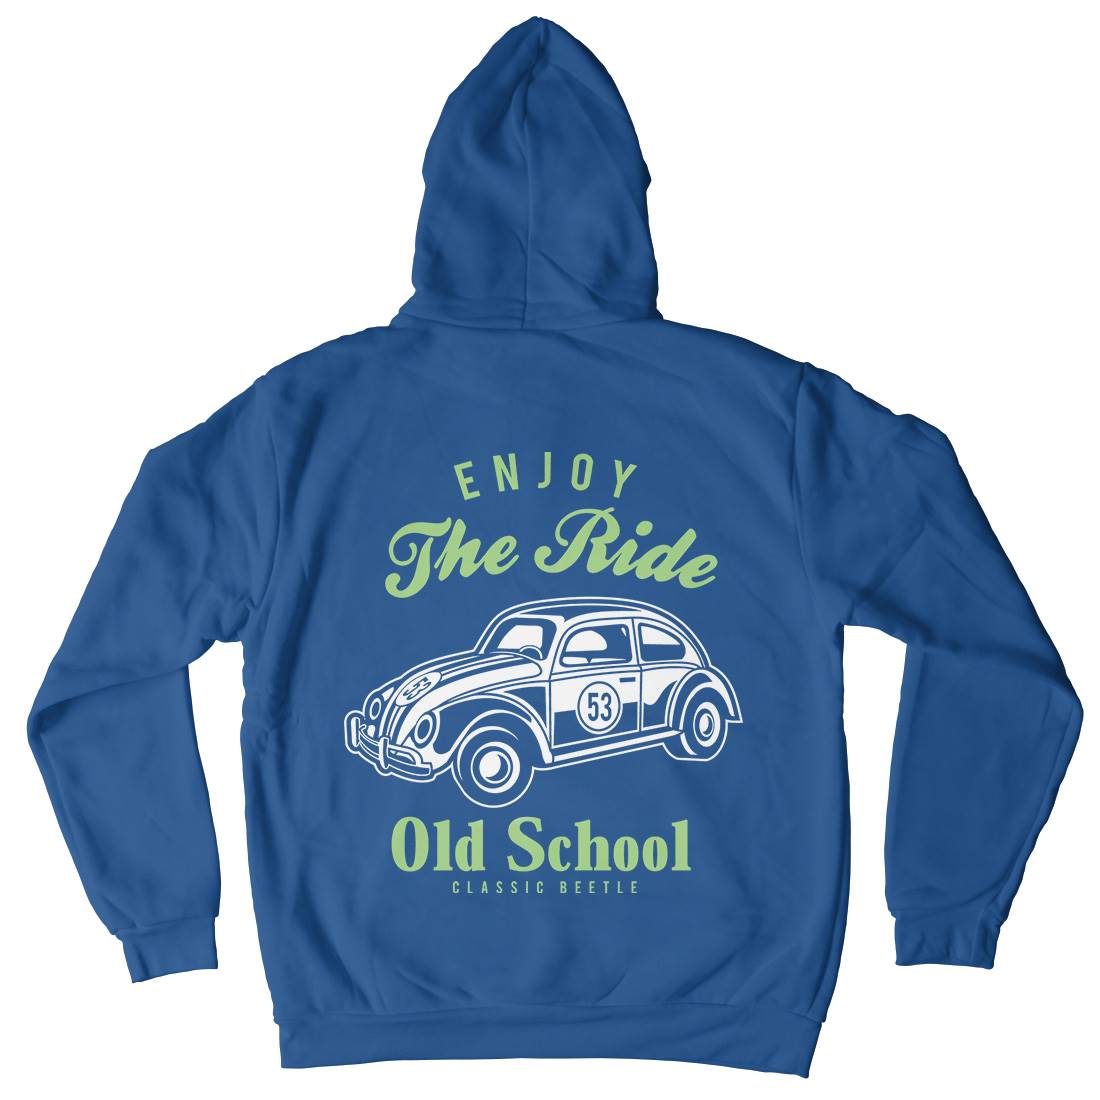 Enjoy The Ride Mens Hoodie With Pocket Cars A047